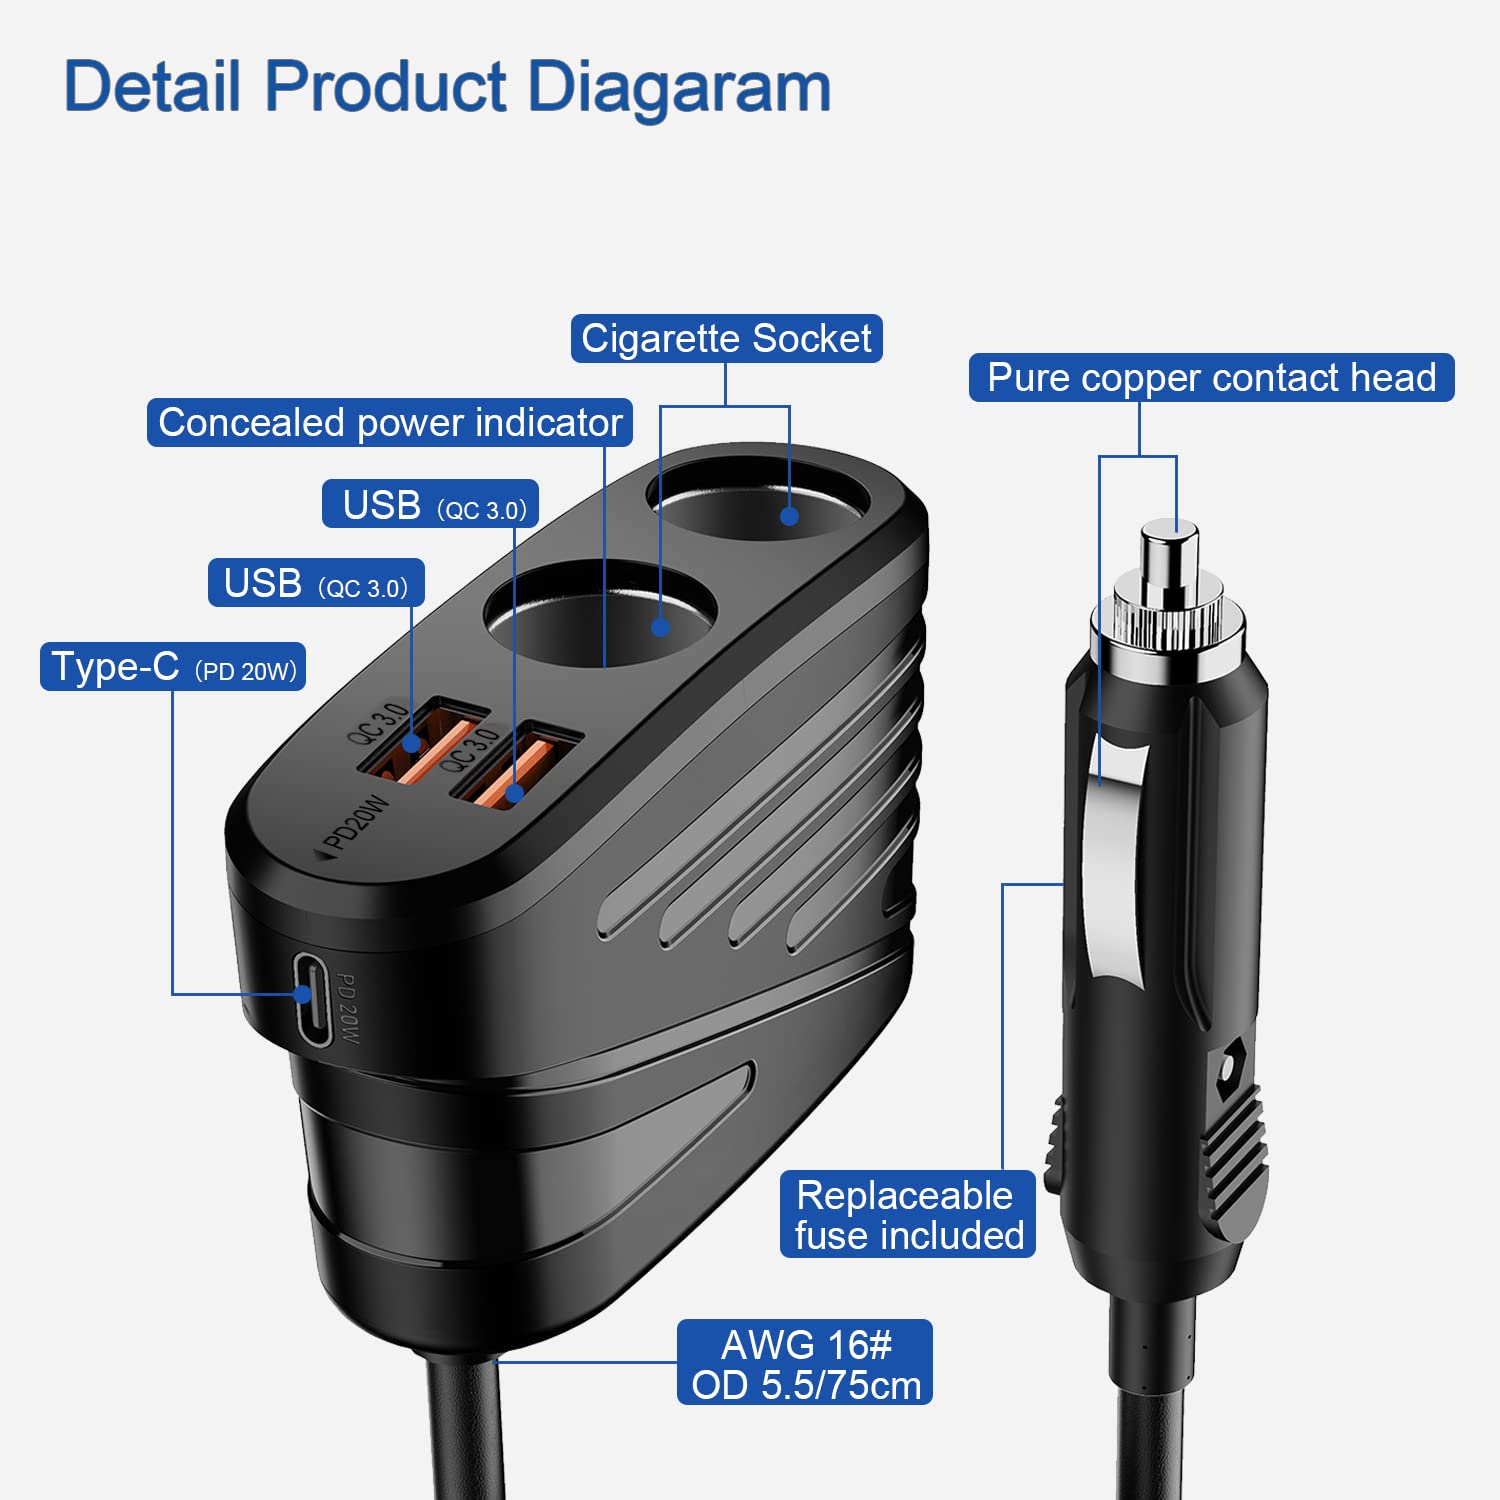 Quick Charge 3.0 Car Charger, 120W 2-Way Cigarette Lighter Splitter DC 12V Power Adapter Socket Extension with Dual USB Quick Chargers for Sat Nav,Dashcam, iPhones, iPad, Android,laptop and More